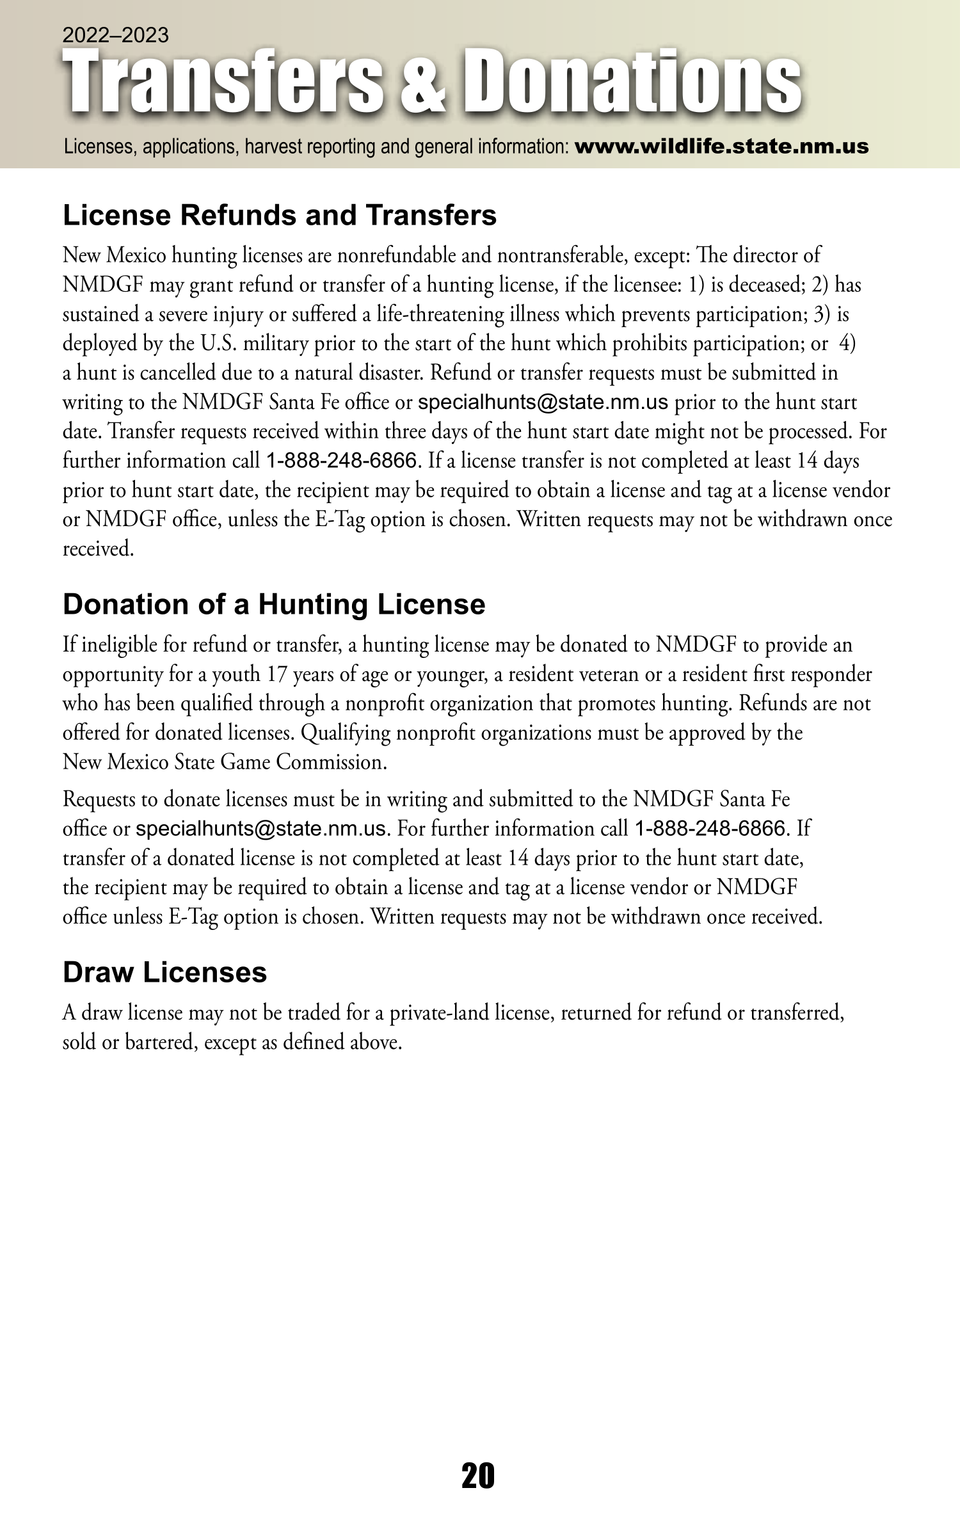 2022 2023 new mexico hunting rules and info 24